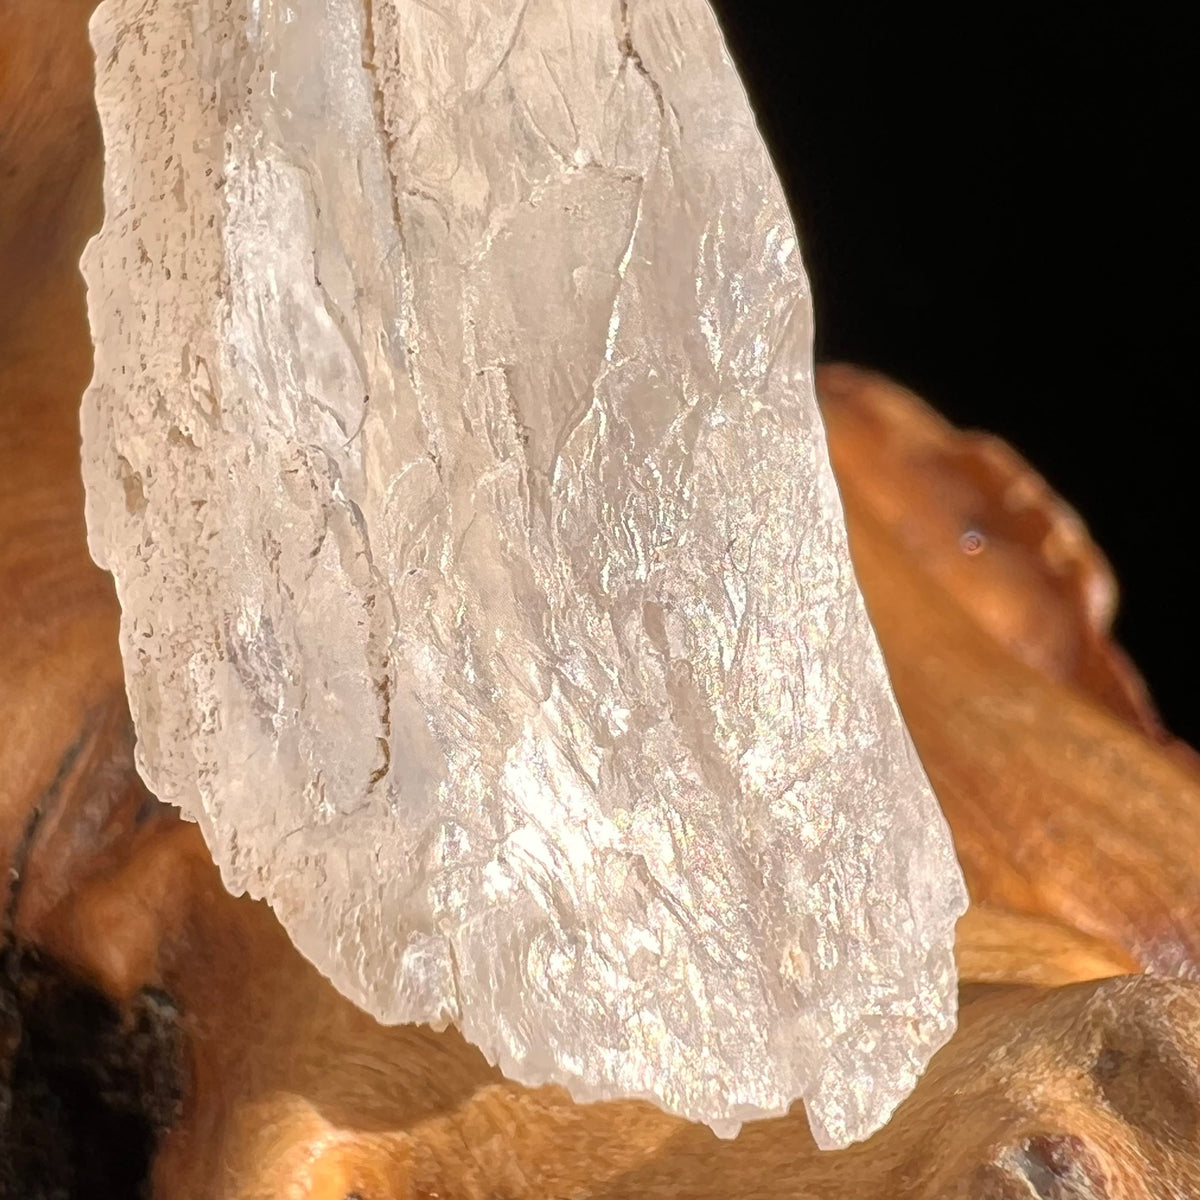 Petalite Crystal "Stone of the Angels" #7